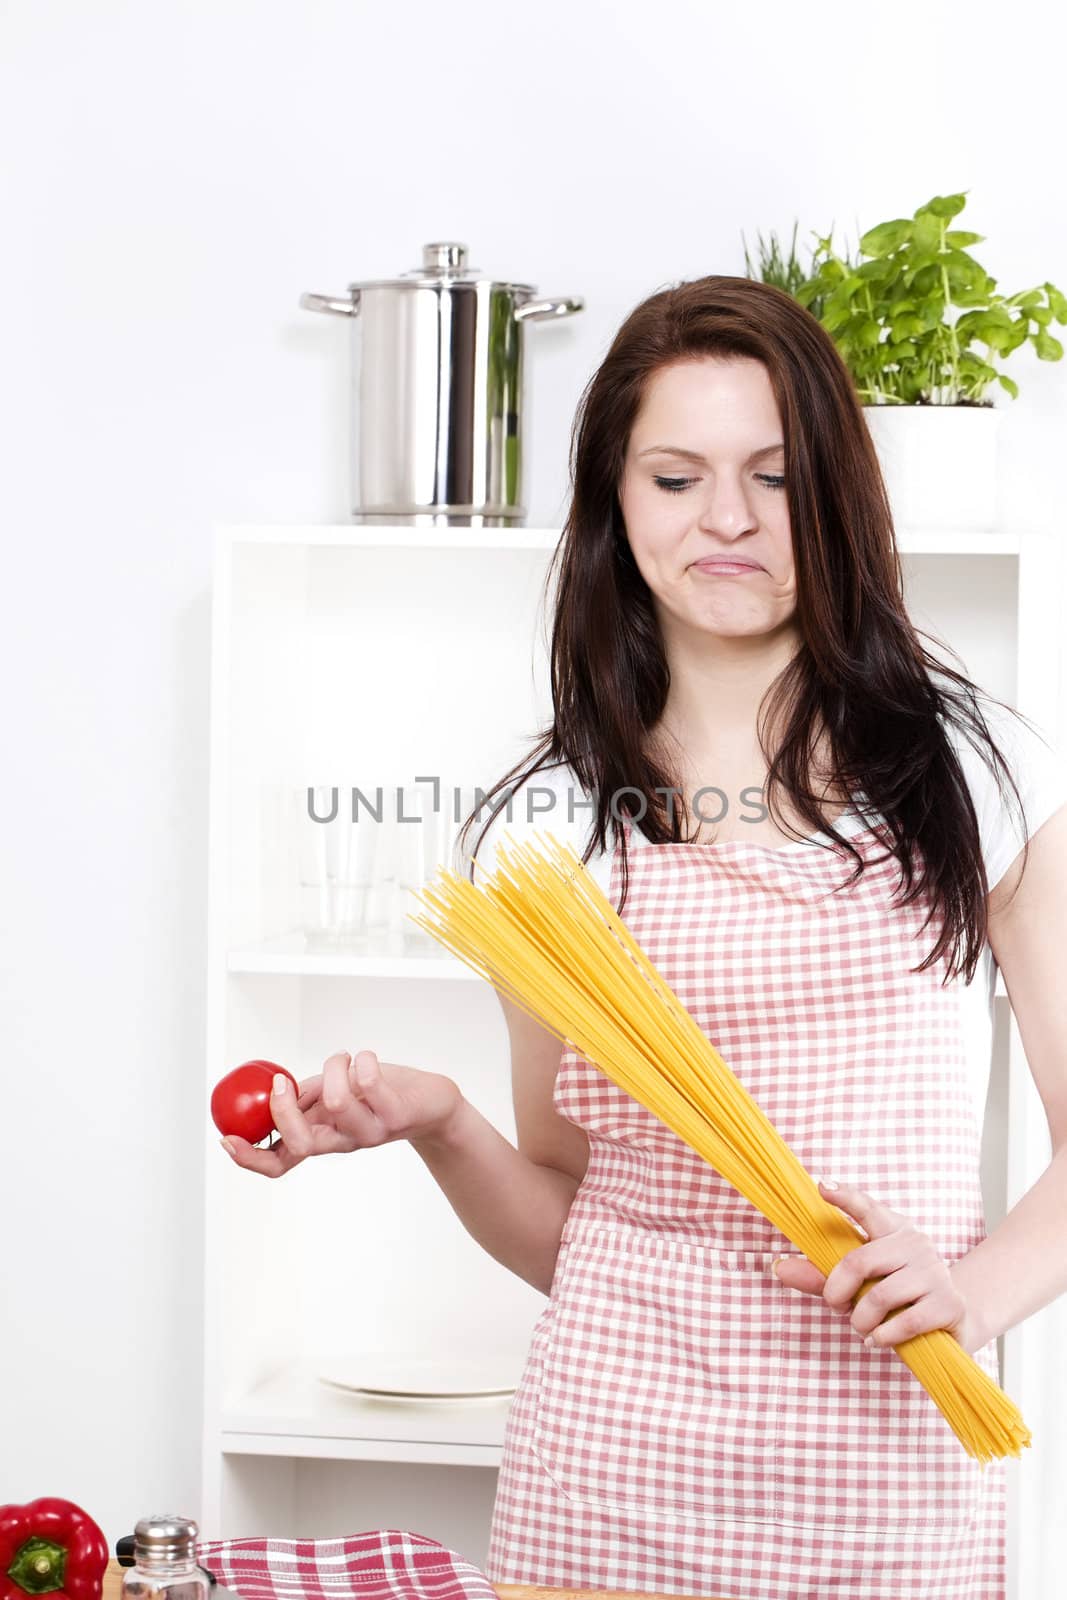 young woman holding pasta and tomato looking at the tomato in her hand